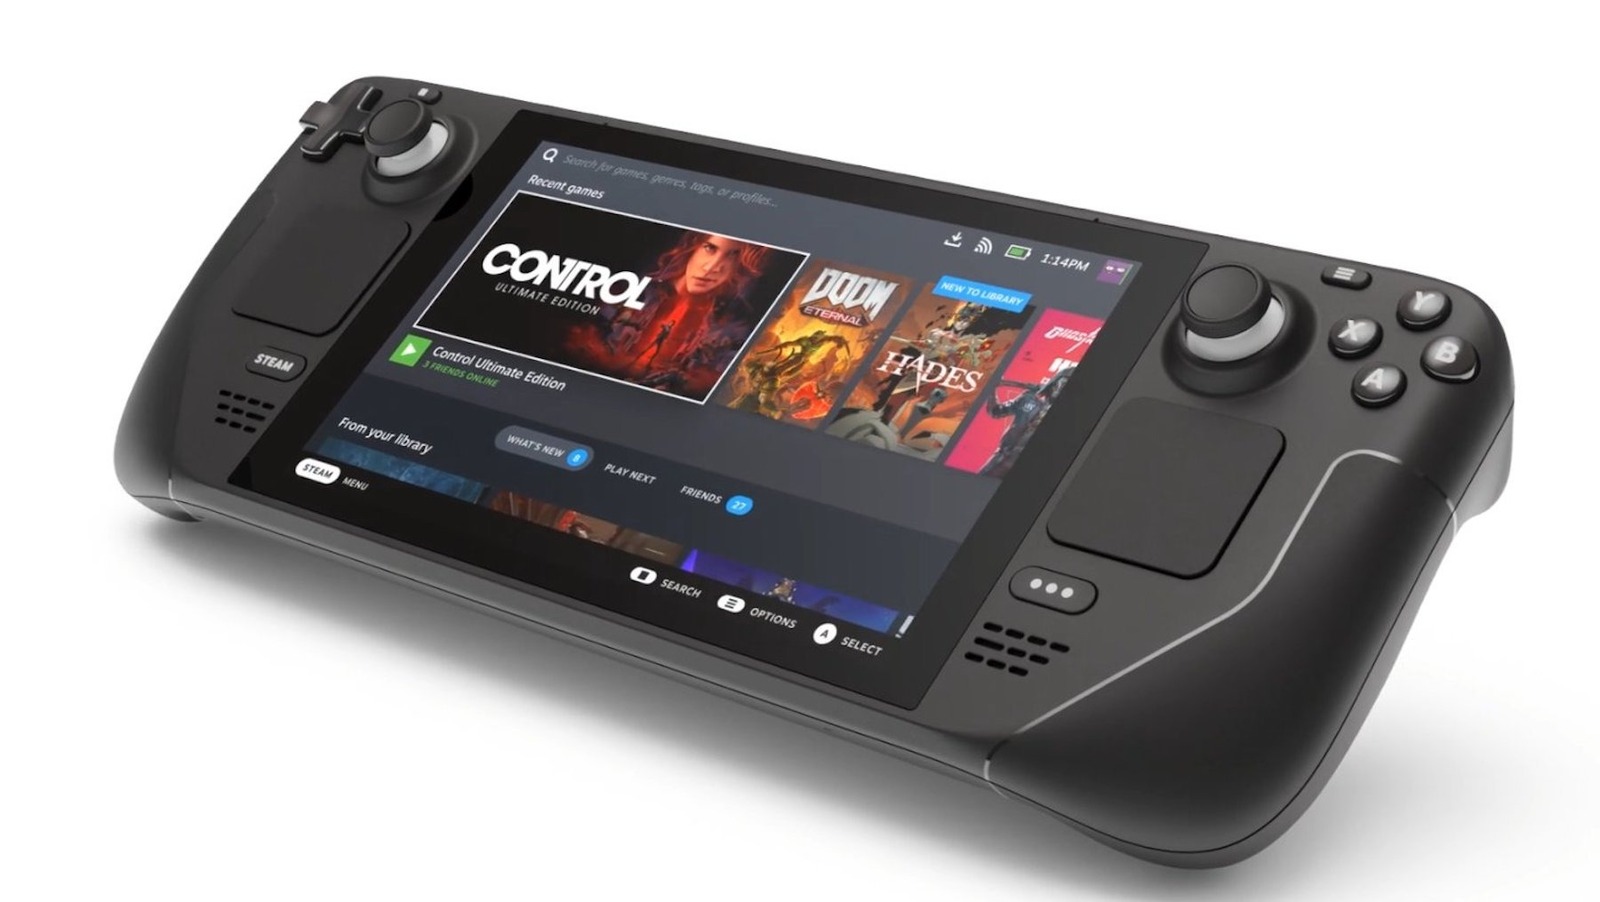 Steam deck review: Valve's handheld gaming PC is revolutionary